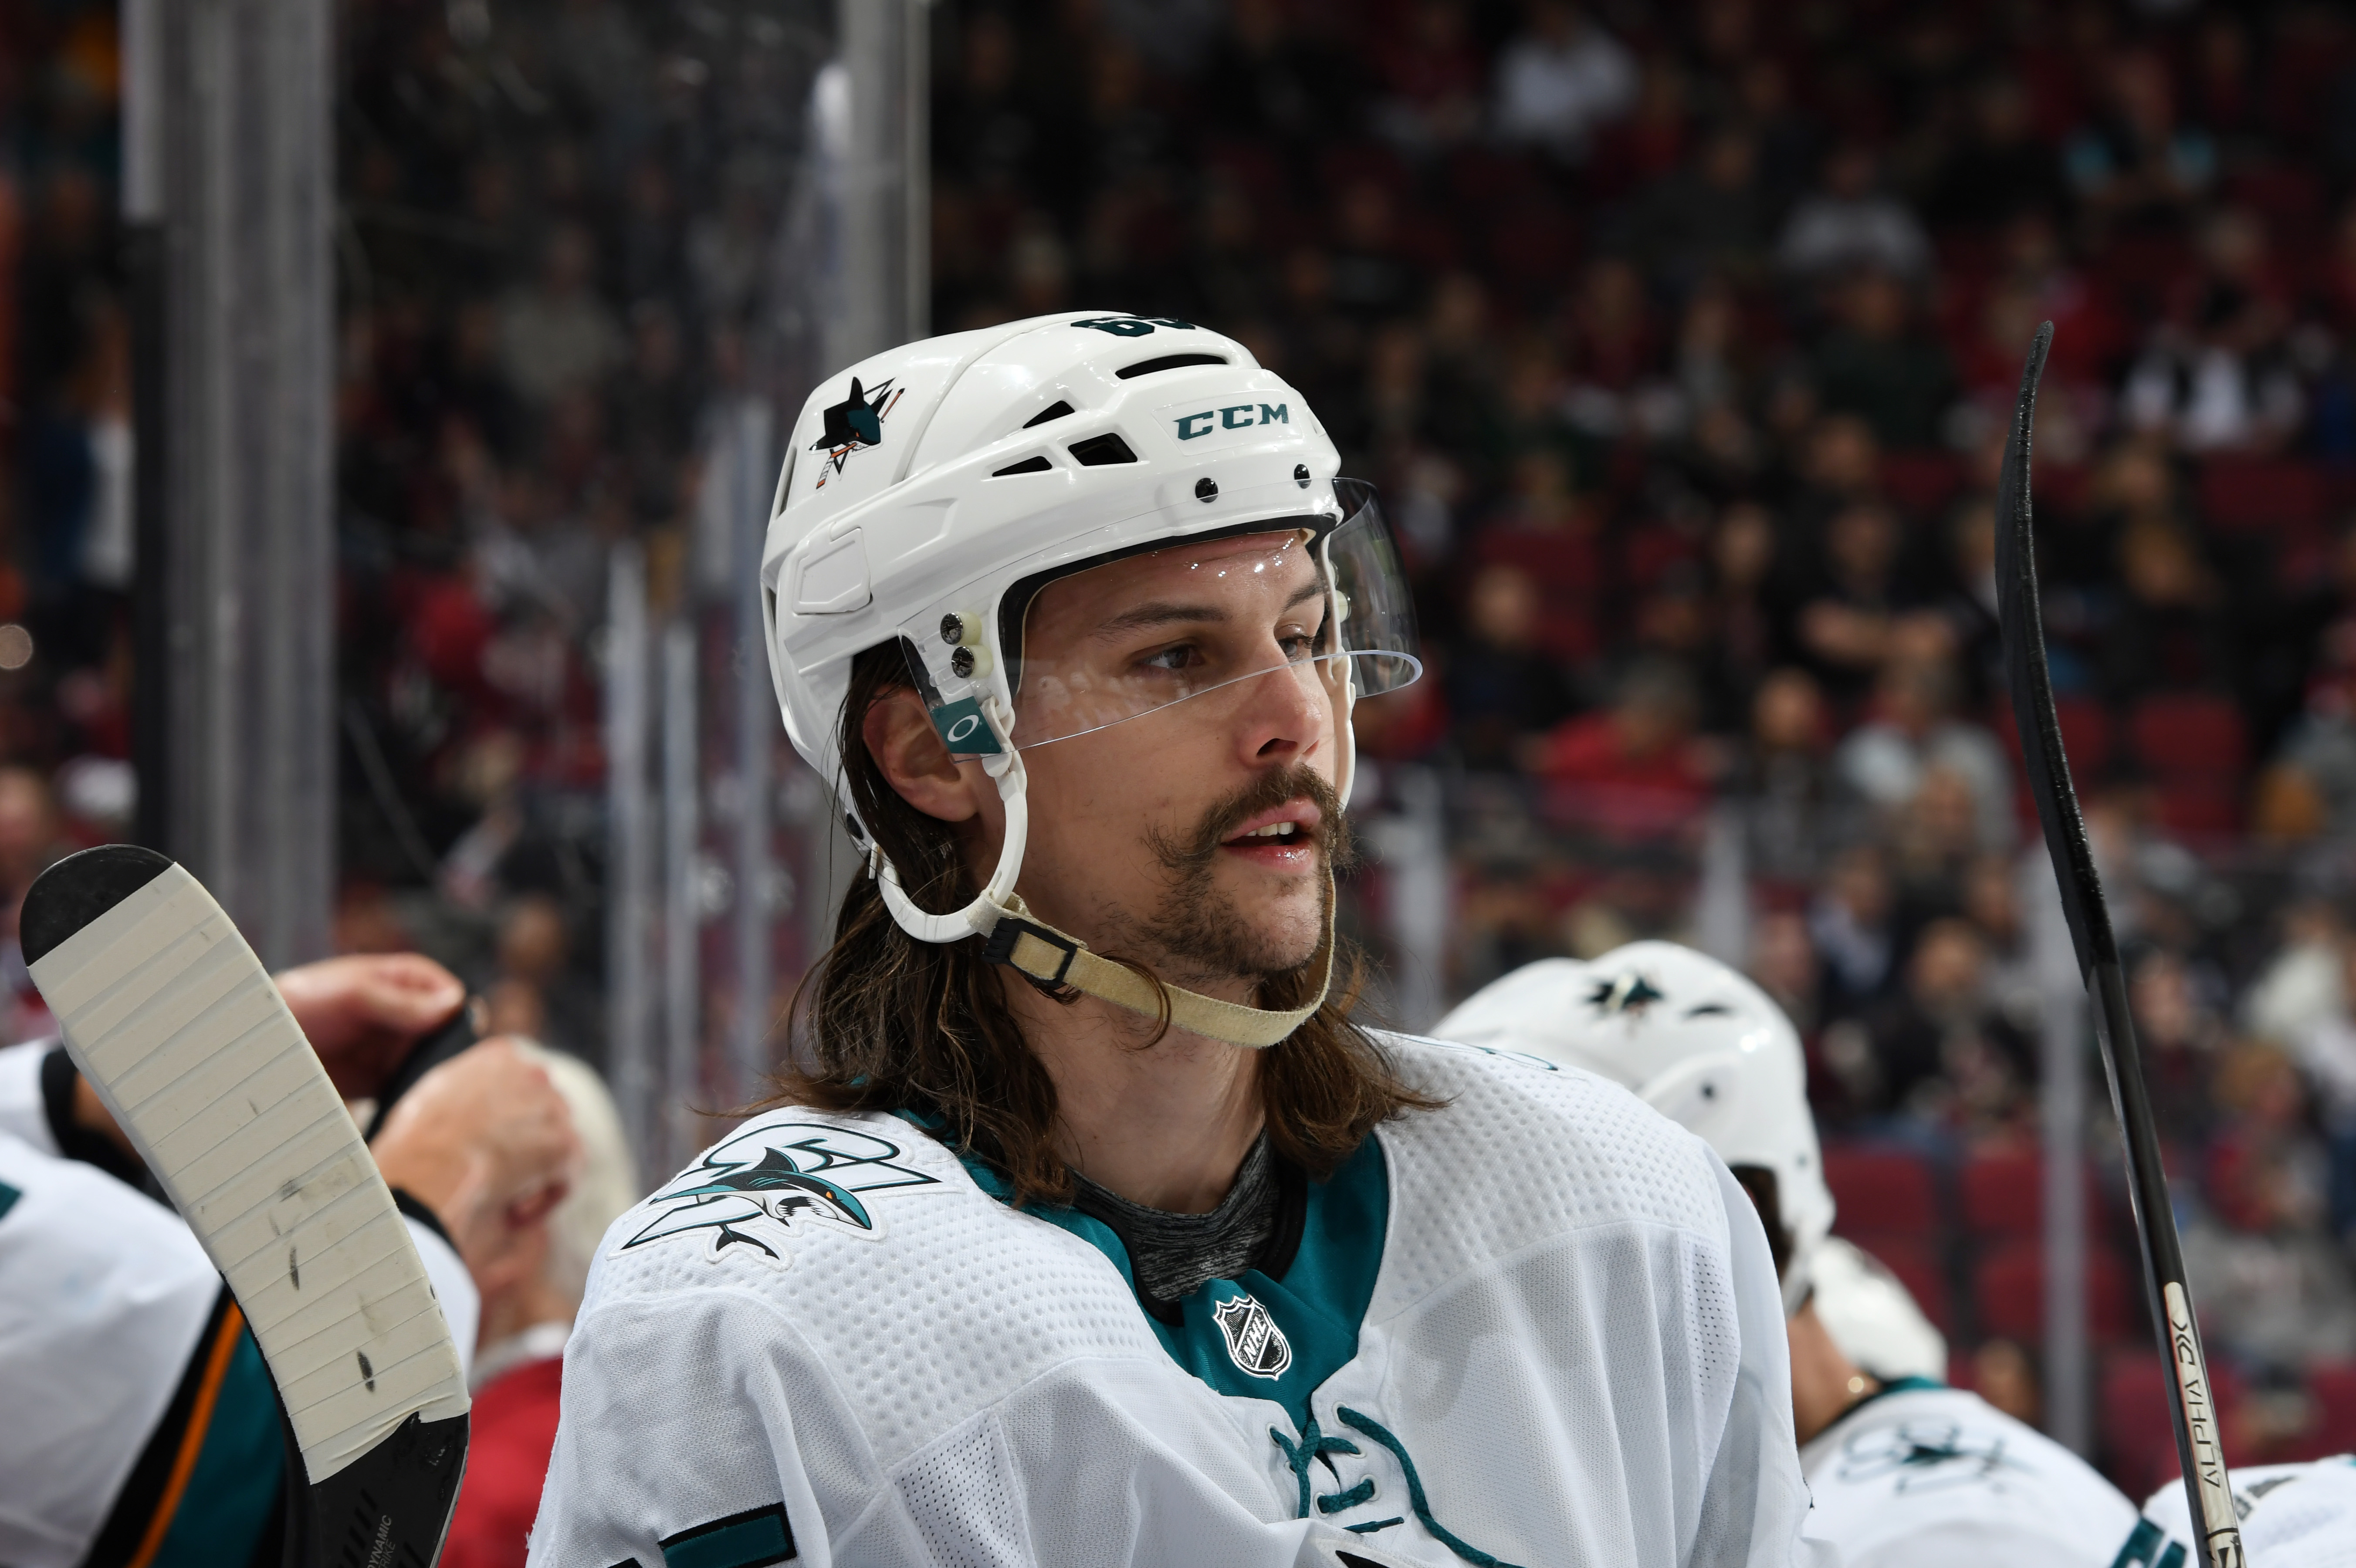 Erik Karlsson #65 of the San Jose Sharks looks up ice during a stop in play against the Arizona Coyotes at Gila River Arena on January 14, 2020 in Glendale, Arizona.